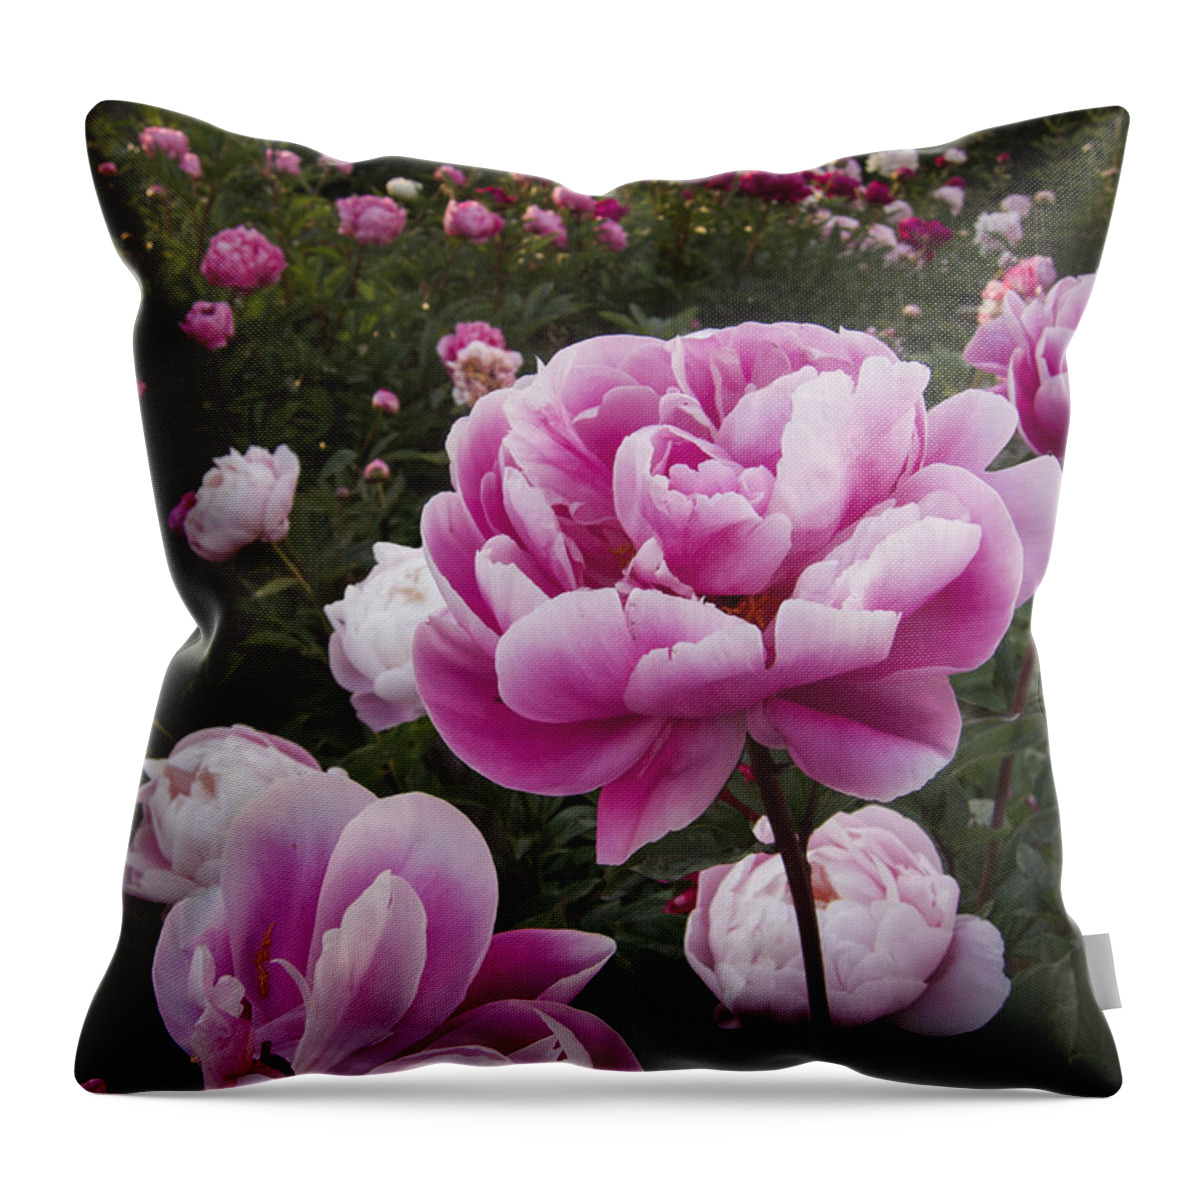 Flowers Throw Pillow featuring the photograph Peony Field by Mary Lee Dereske